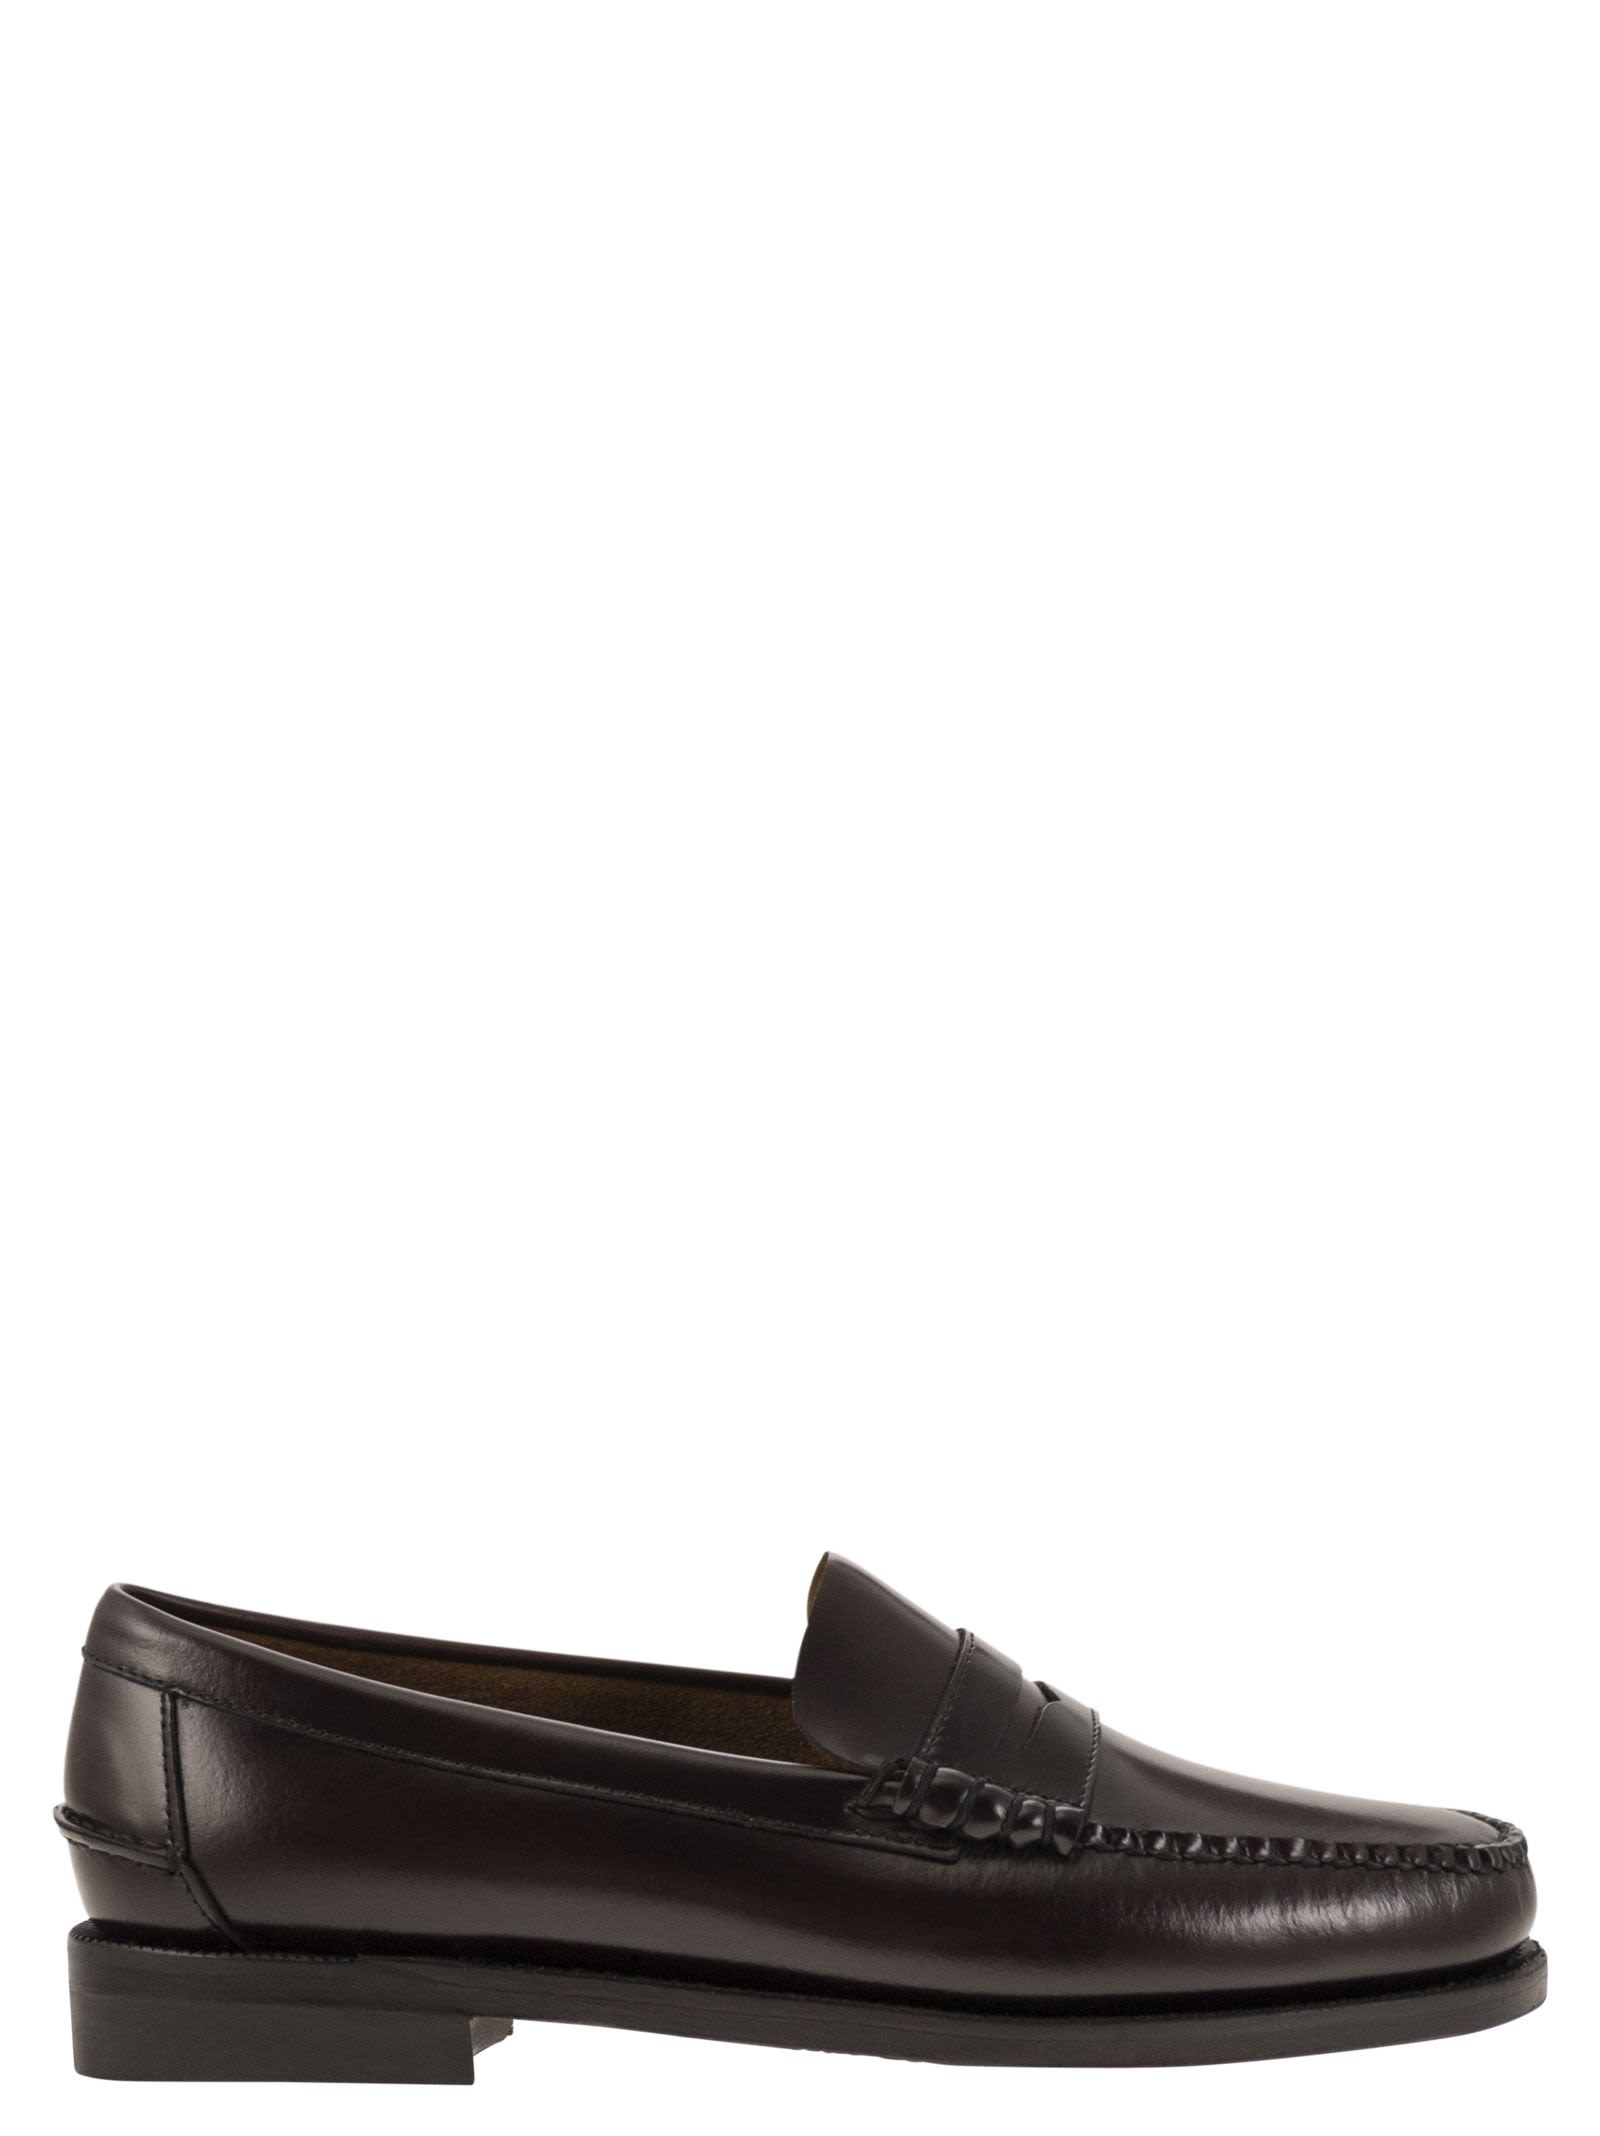 Classic Dan - Smooth Leather Moccasin